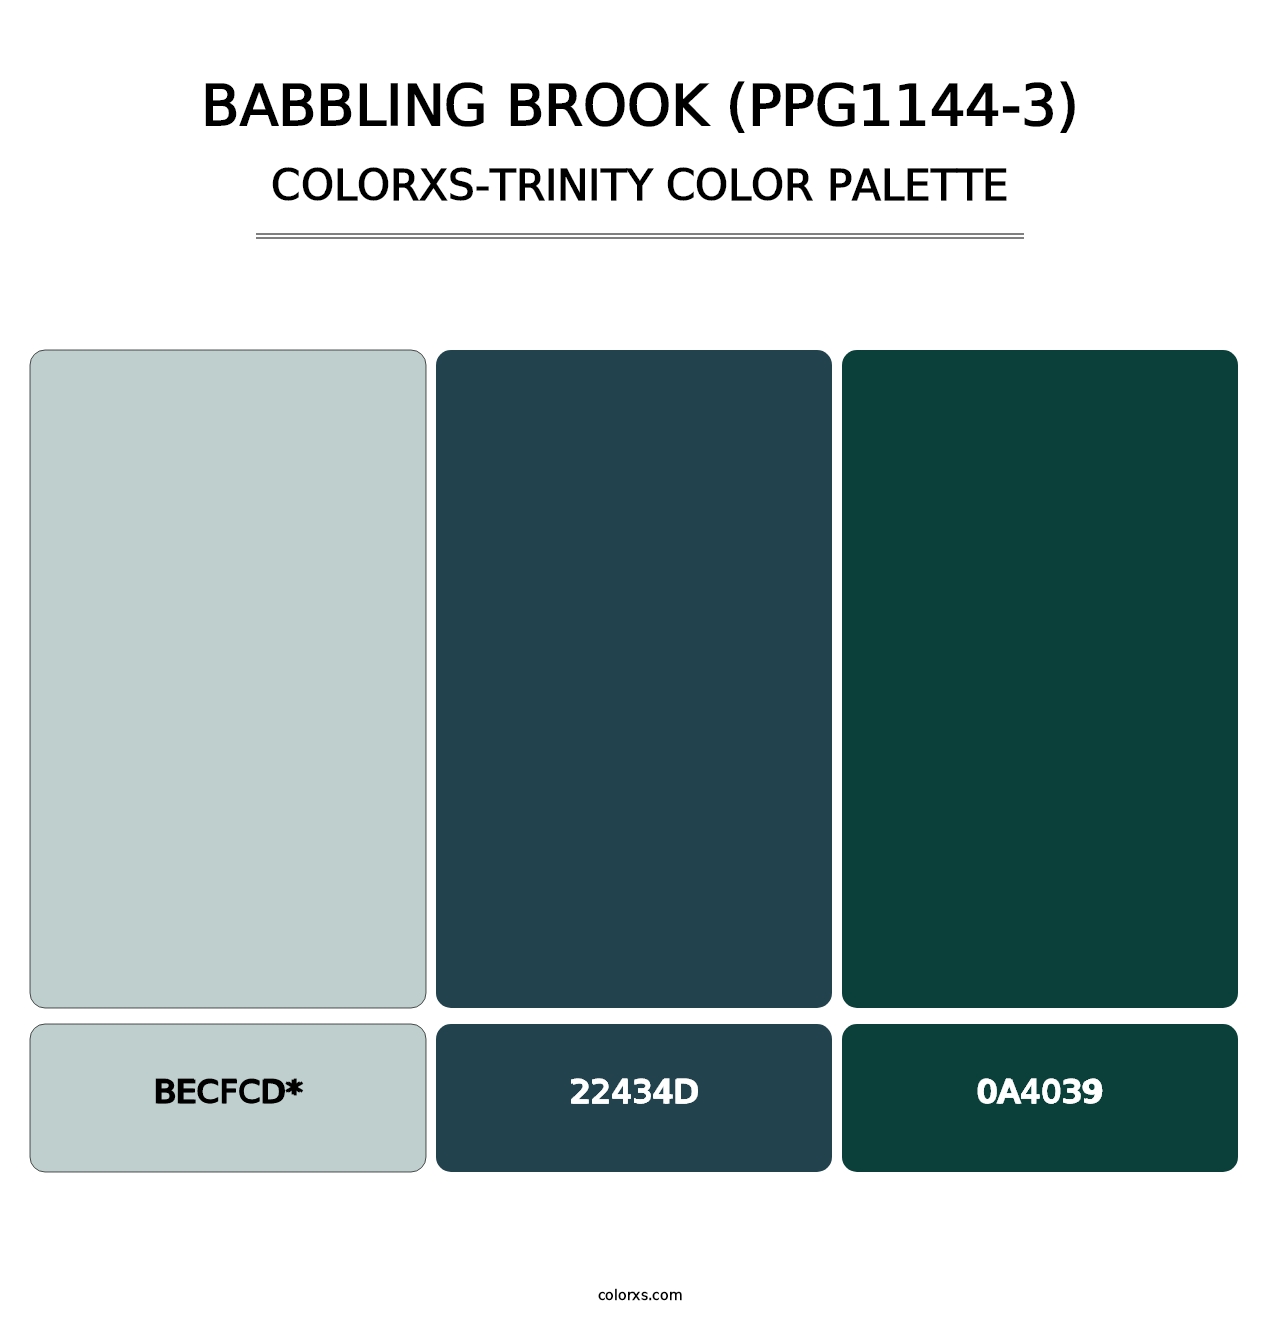 Babbling Brook (PPG1144-3) - Colorxs Trinity Palette